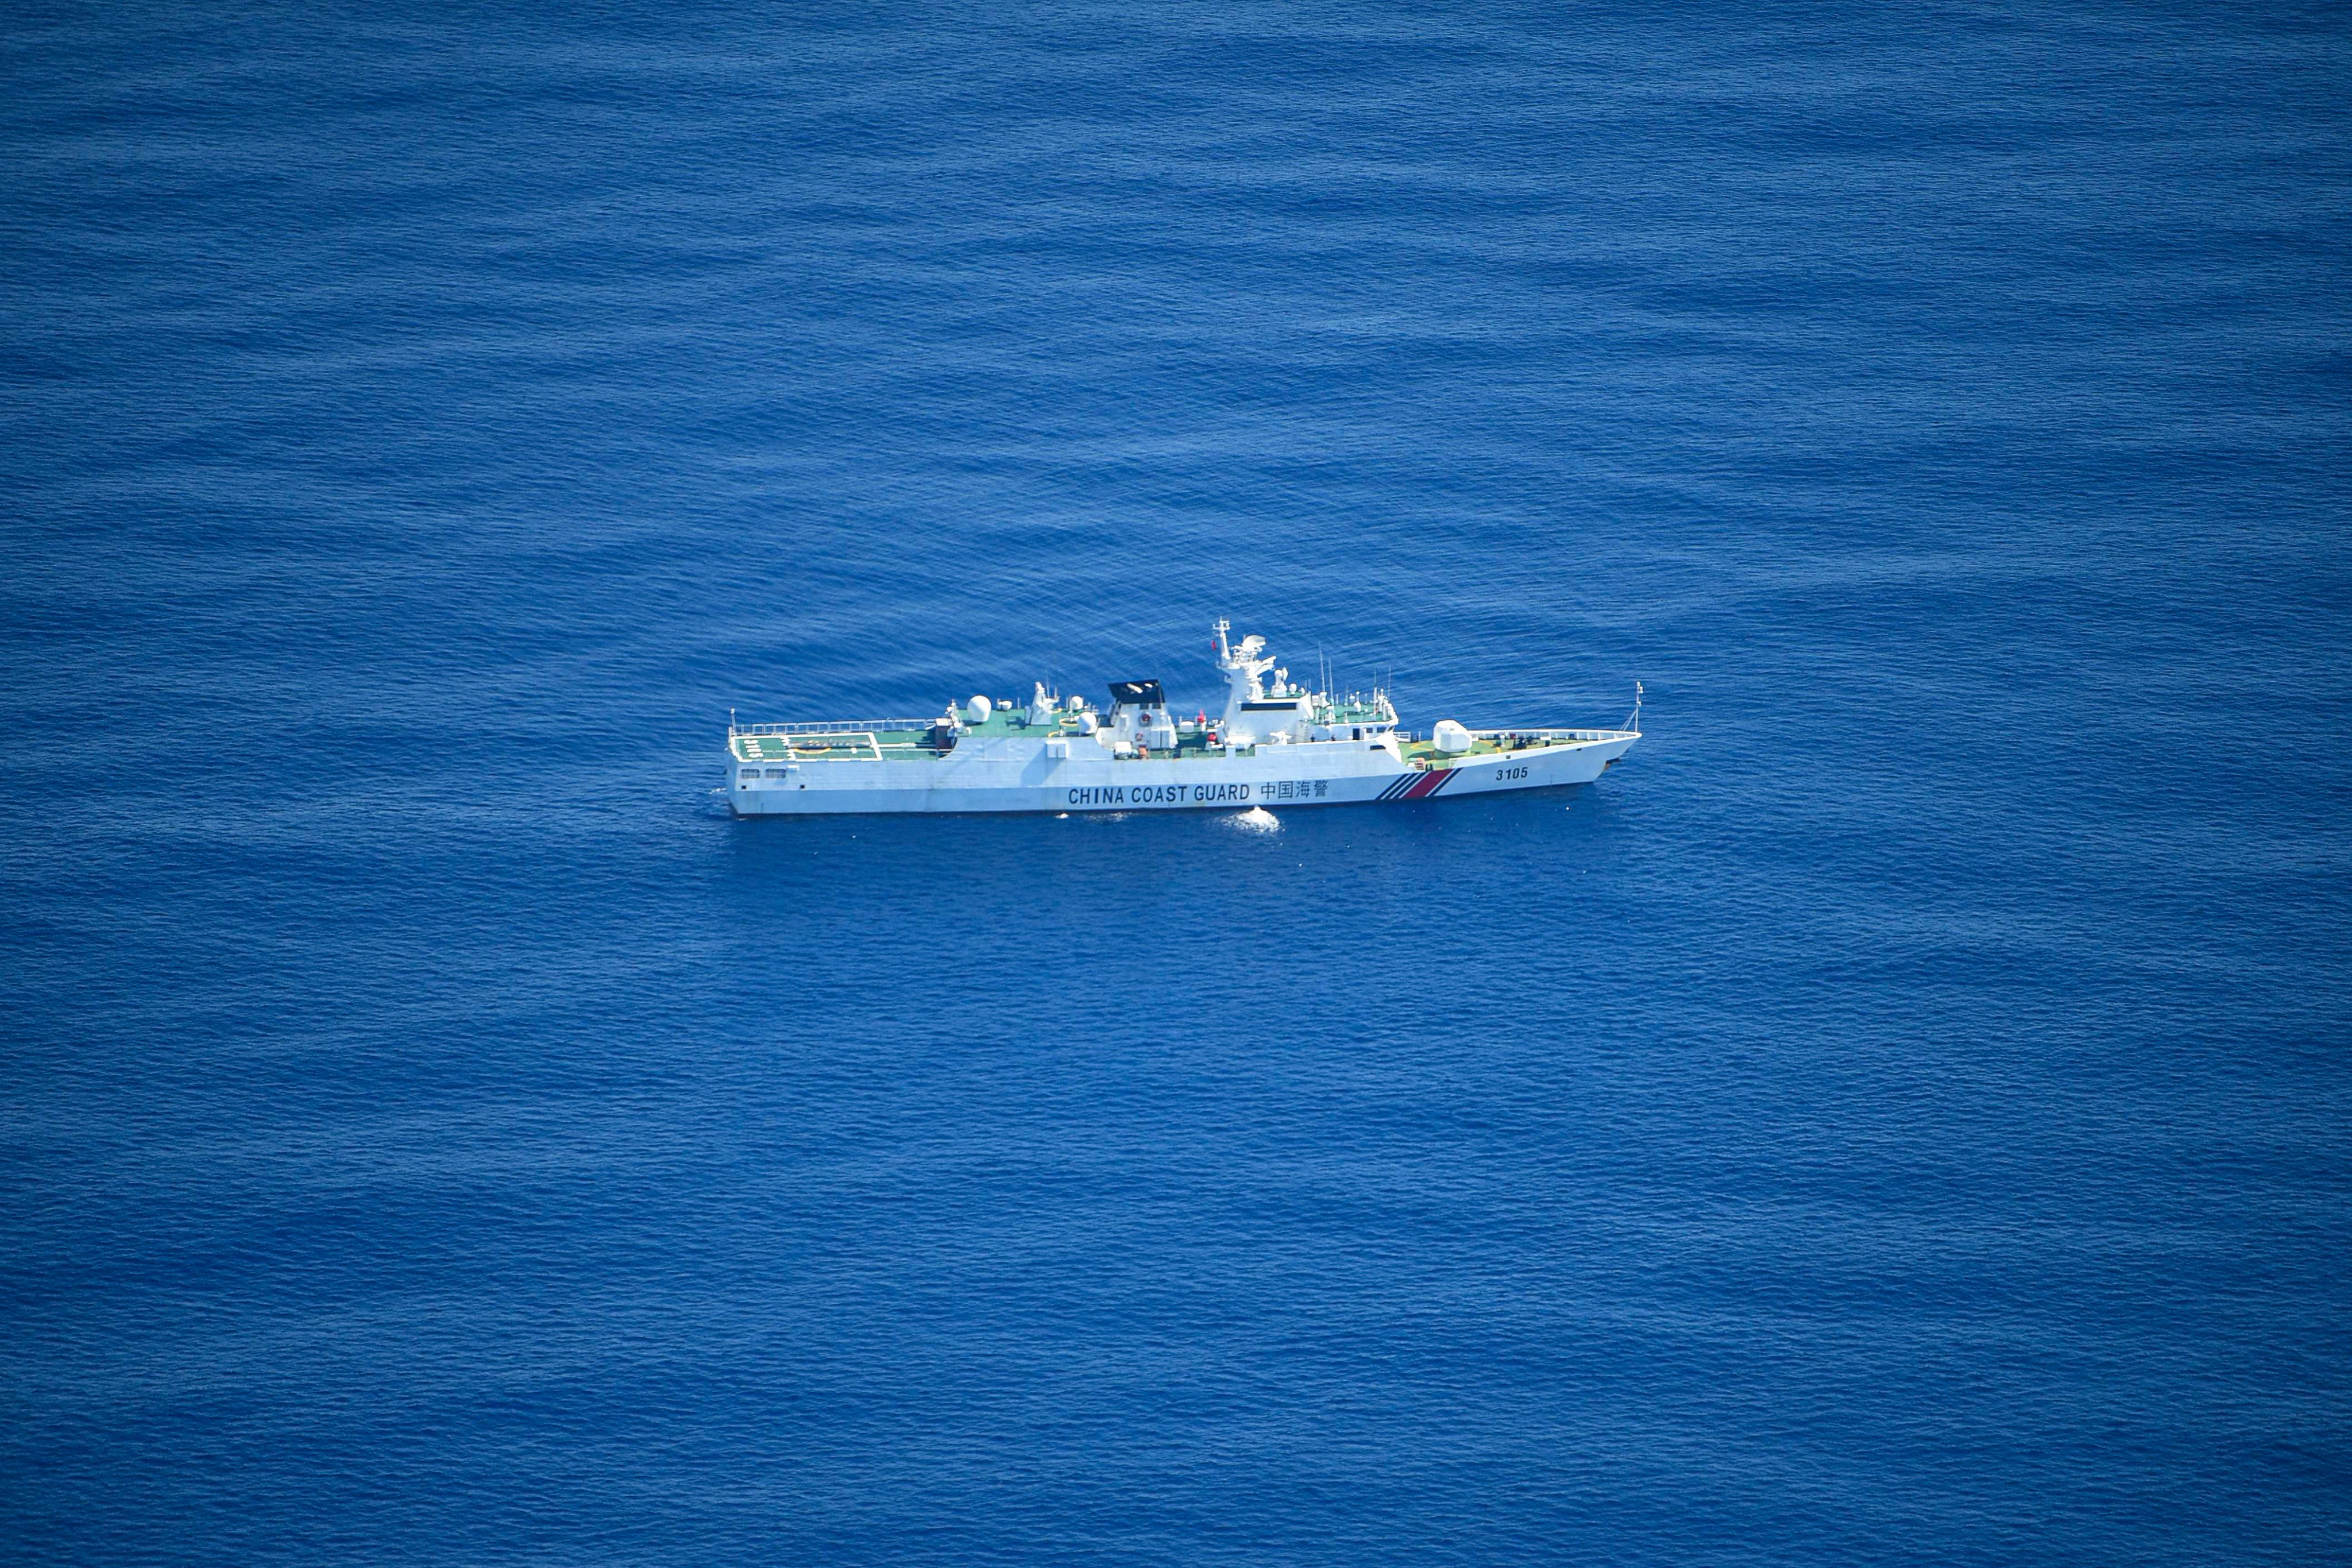 A Chinese coastguard ship on patrol near the Scarborough Shoal last month. Photo: AFP